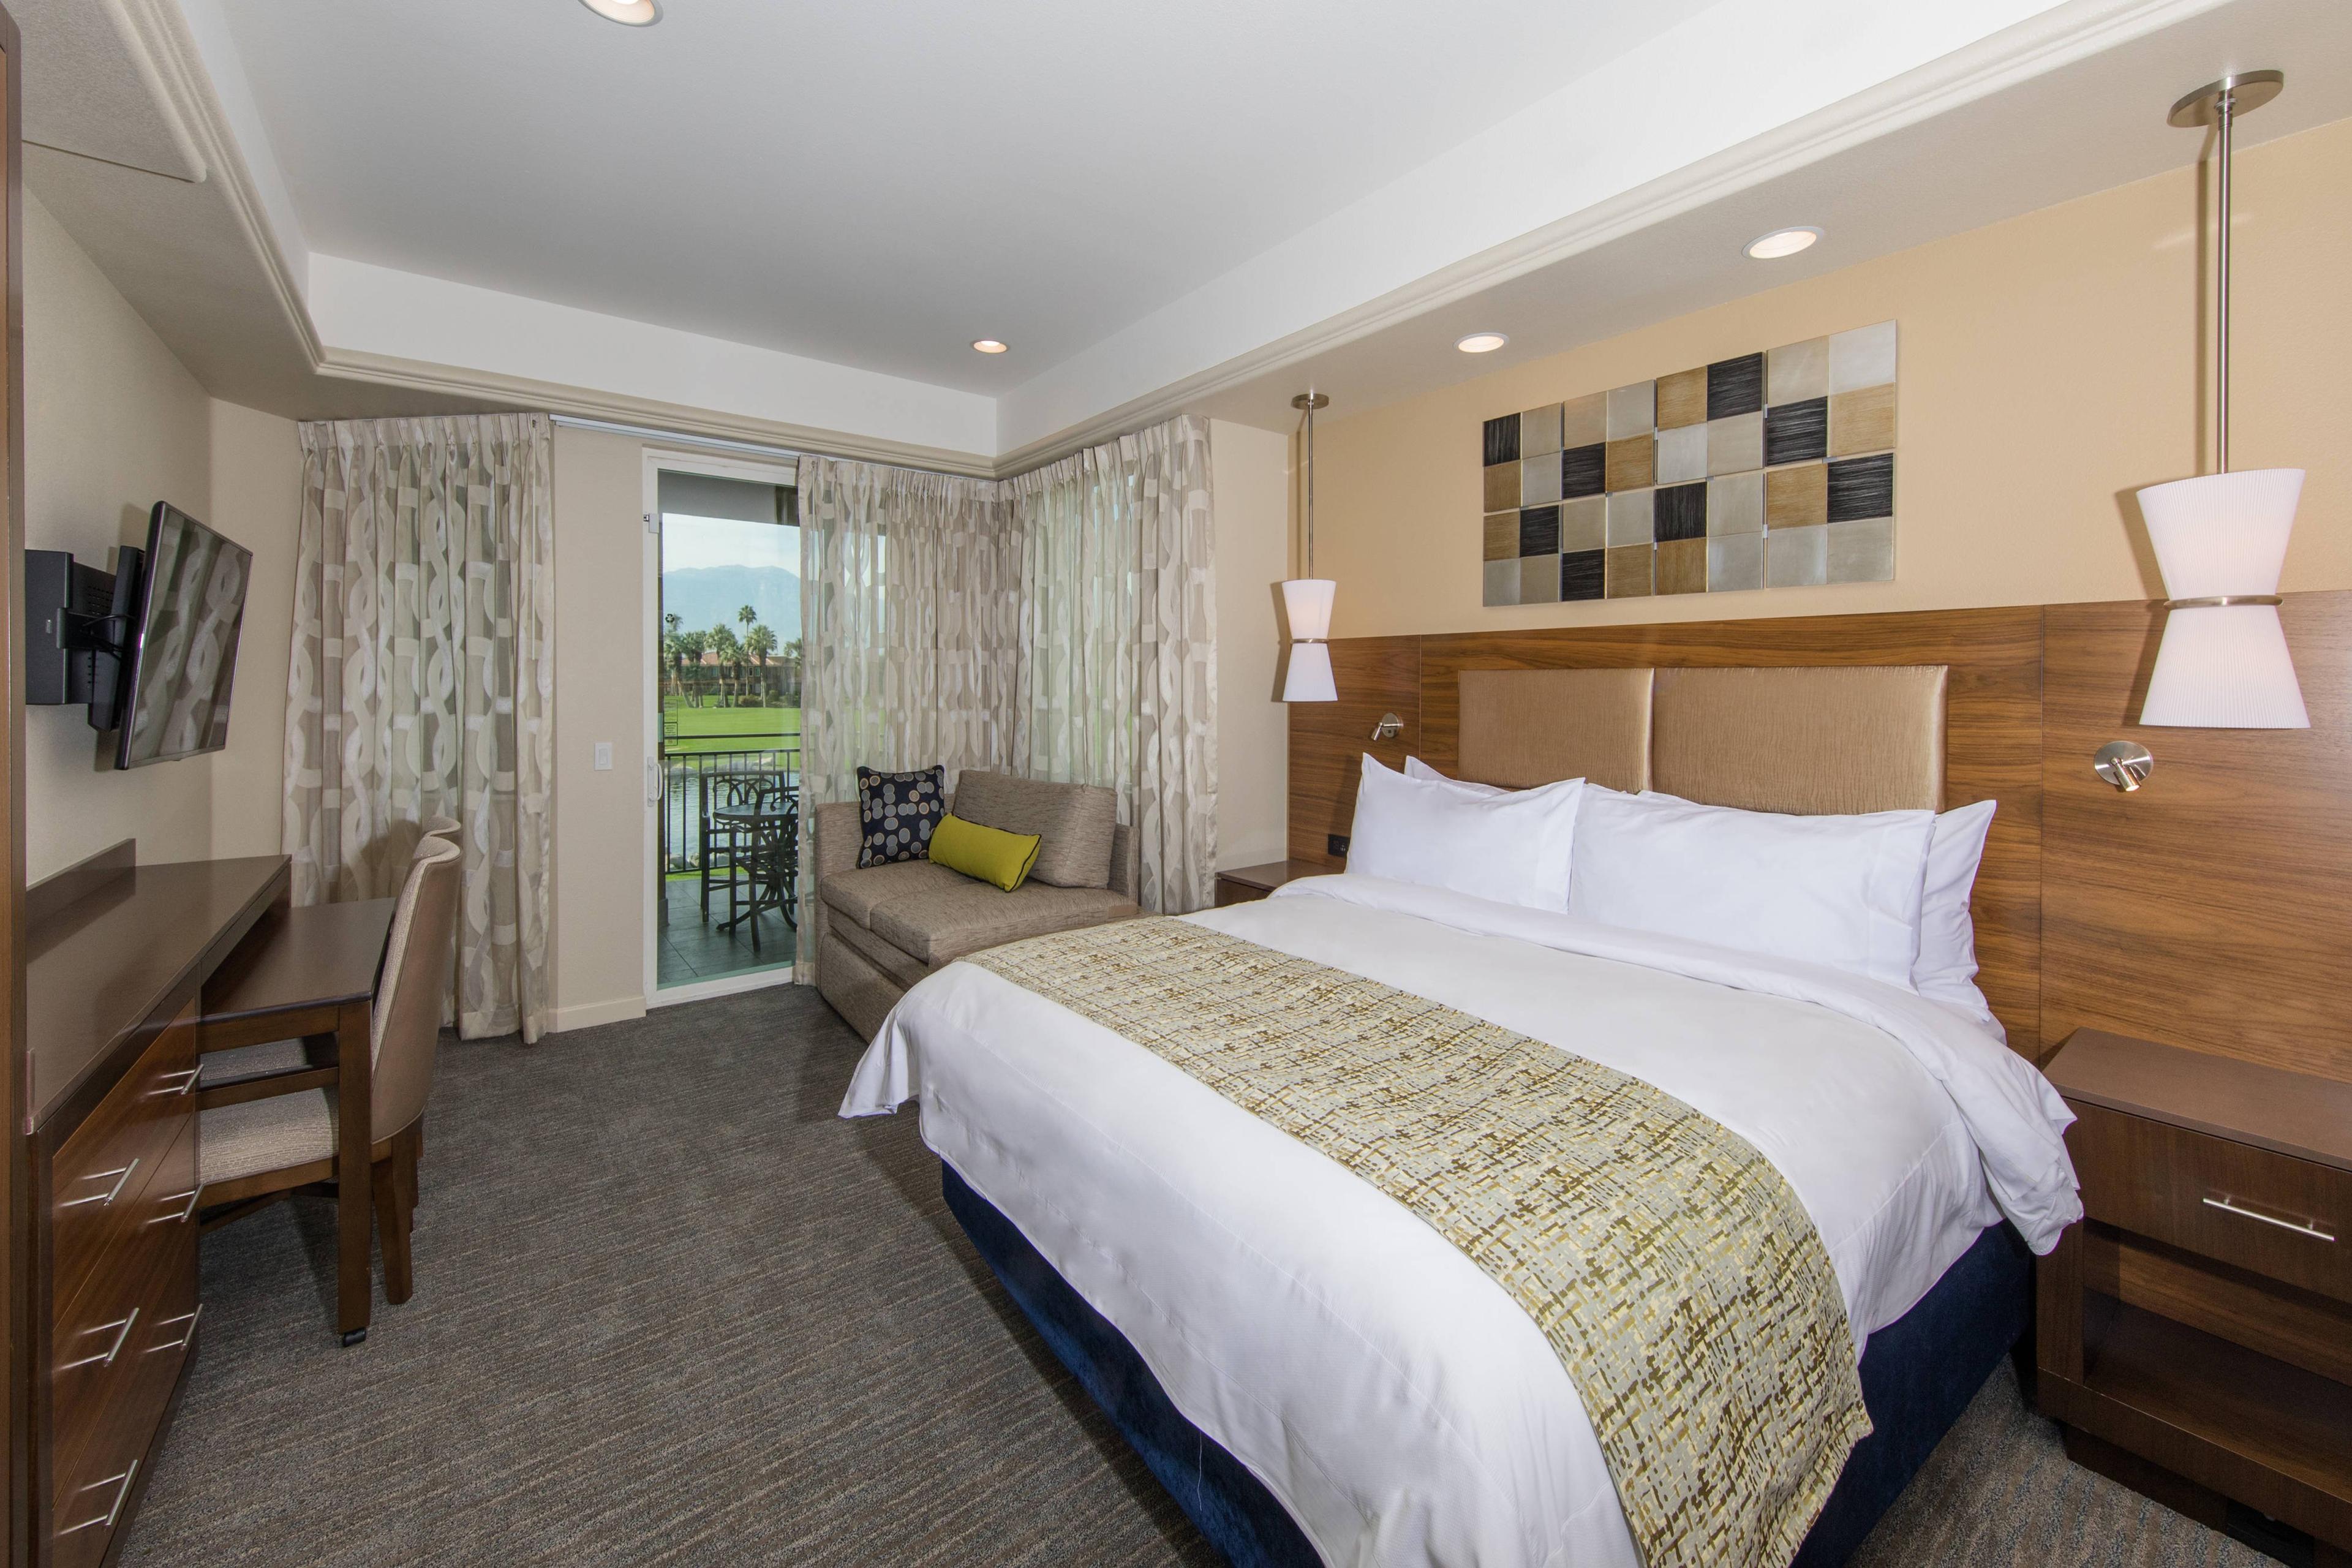 Feel at home during your Palm Desert vacation in these well-designed rooms, which open onto a furnished patio or balcony.